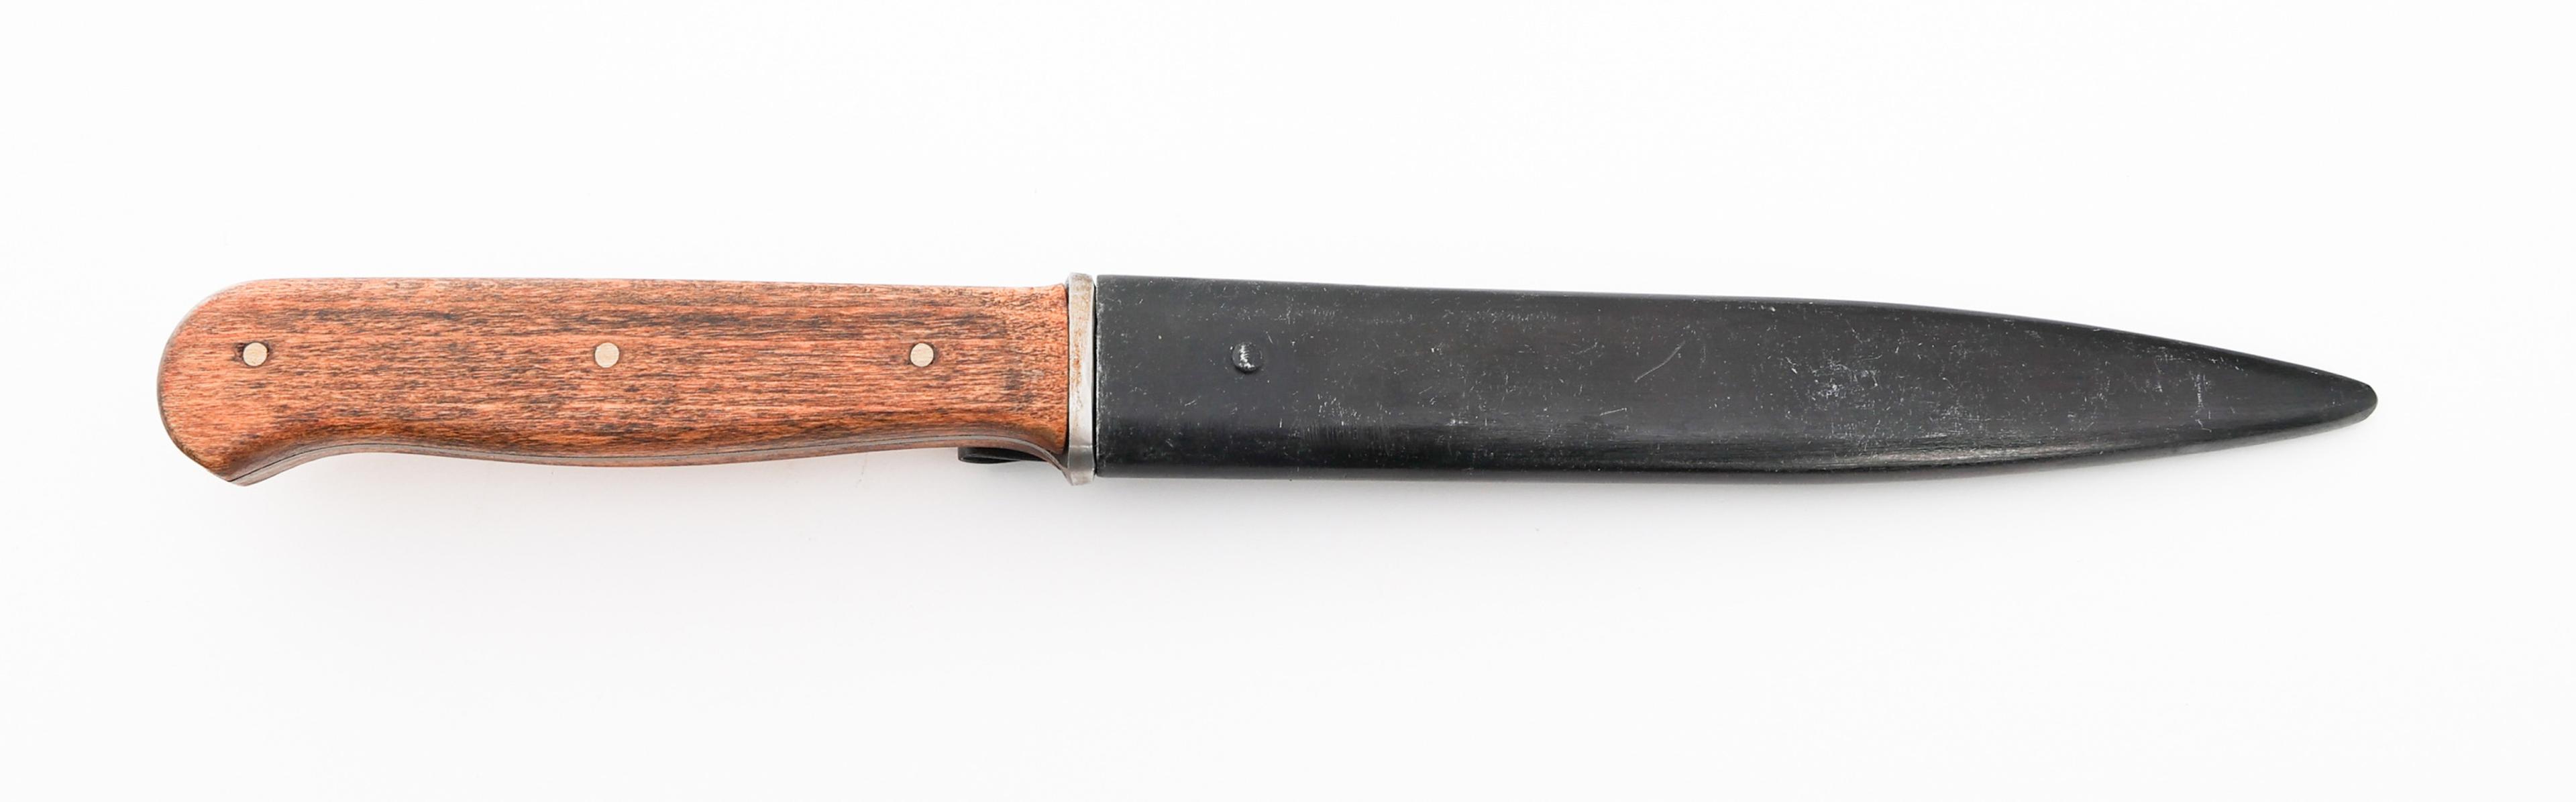 WWII GERMAN BOOT KNIFE by CHRISTIANS